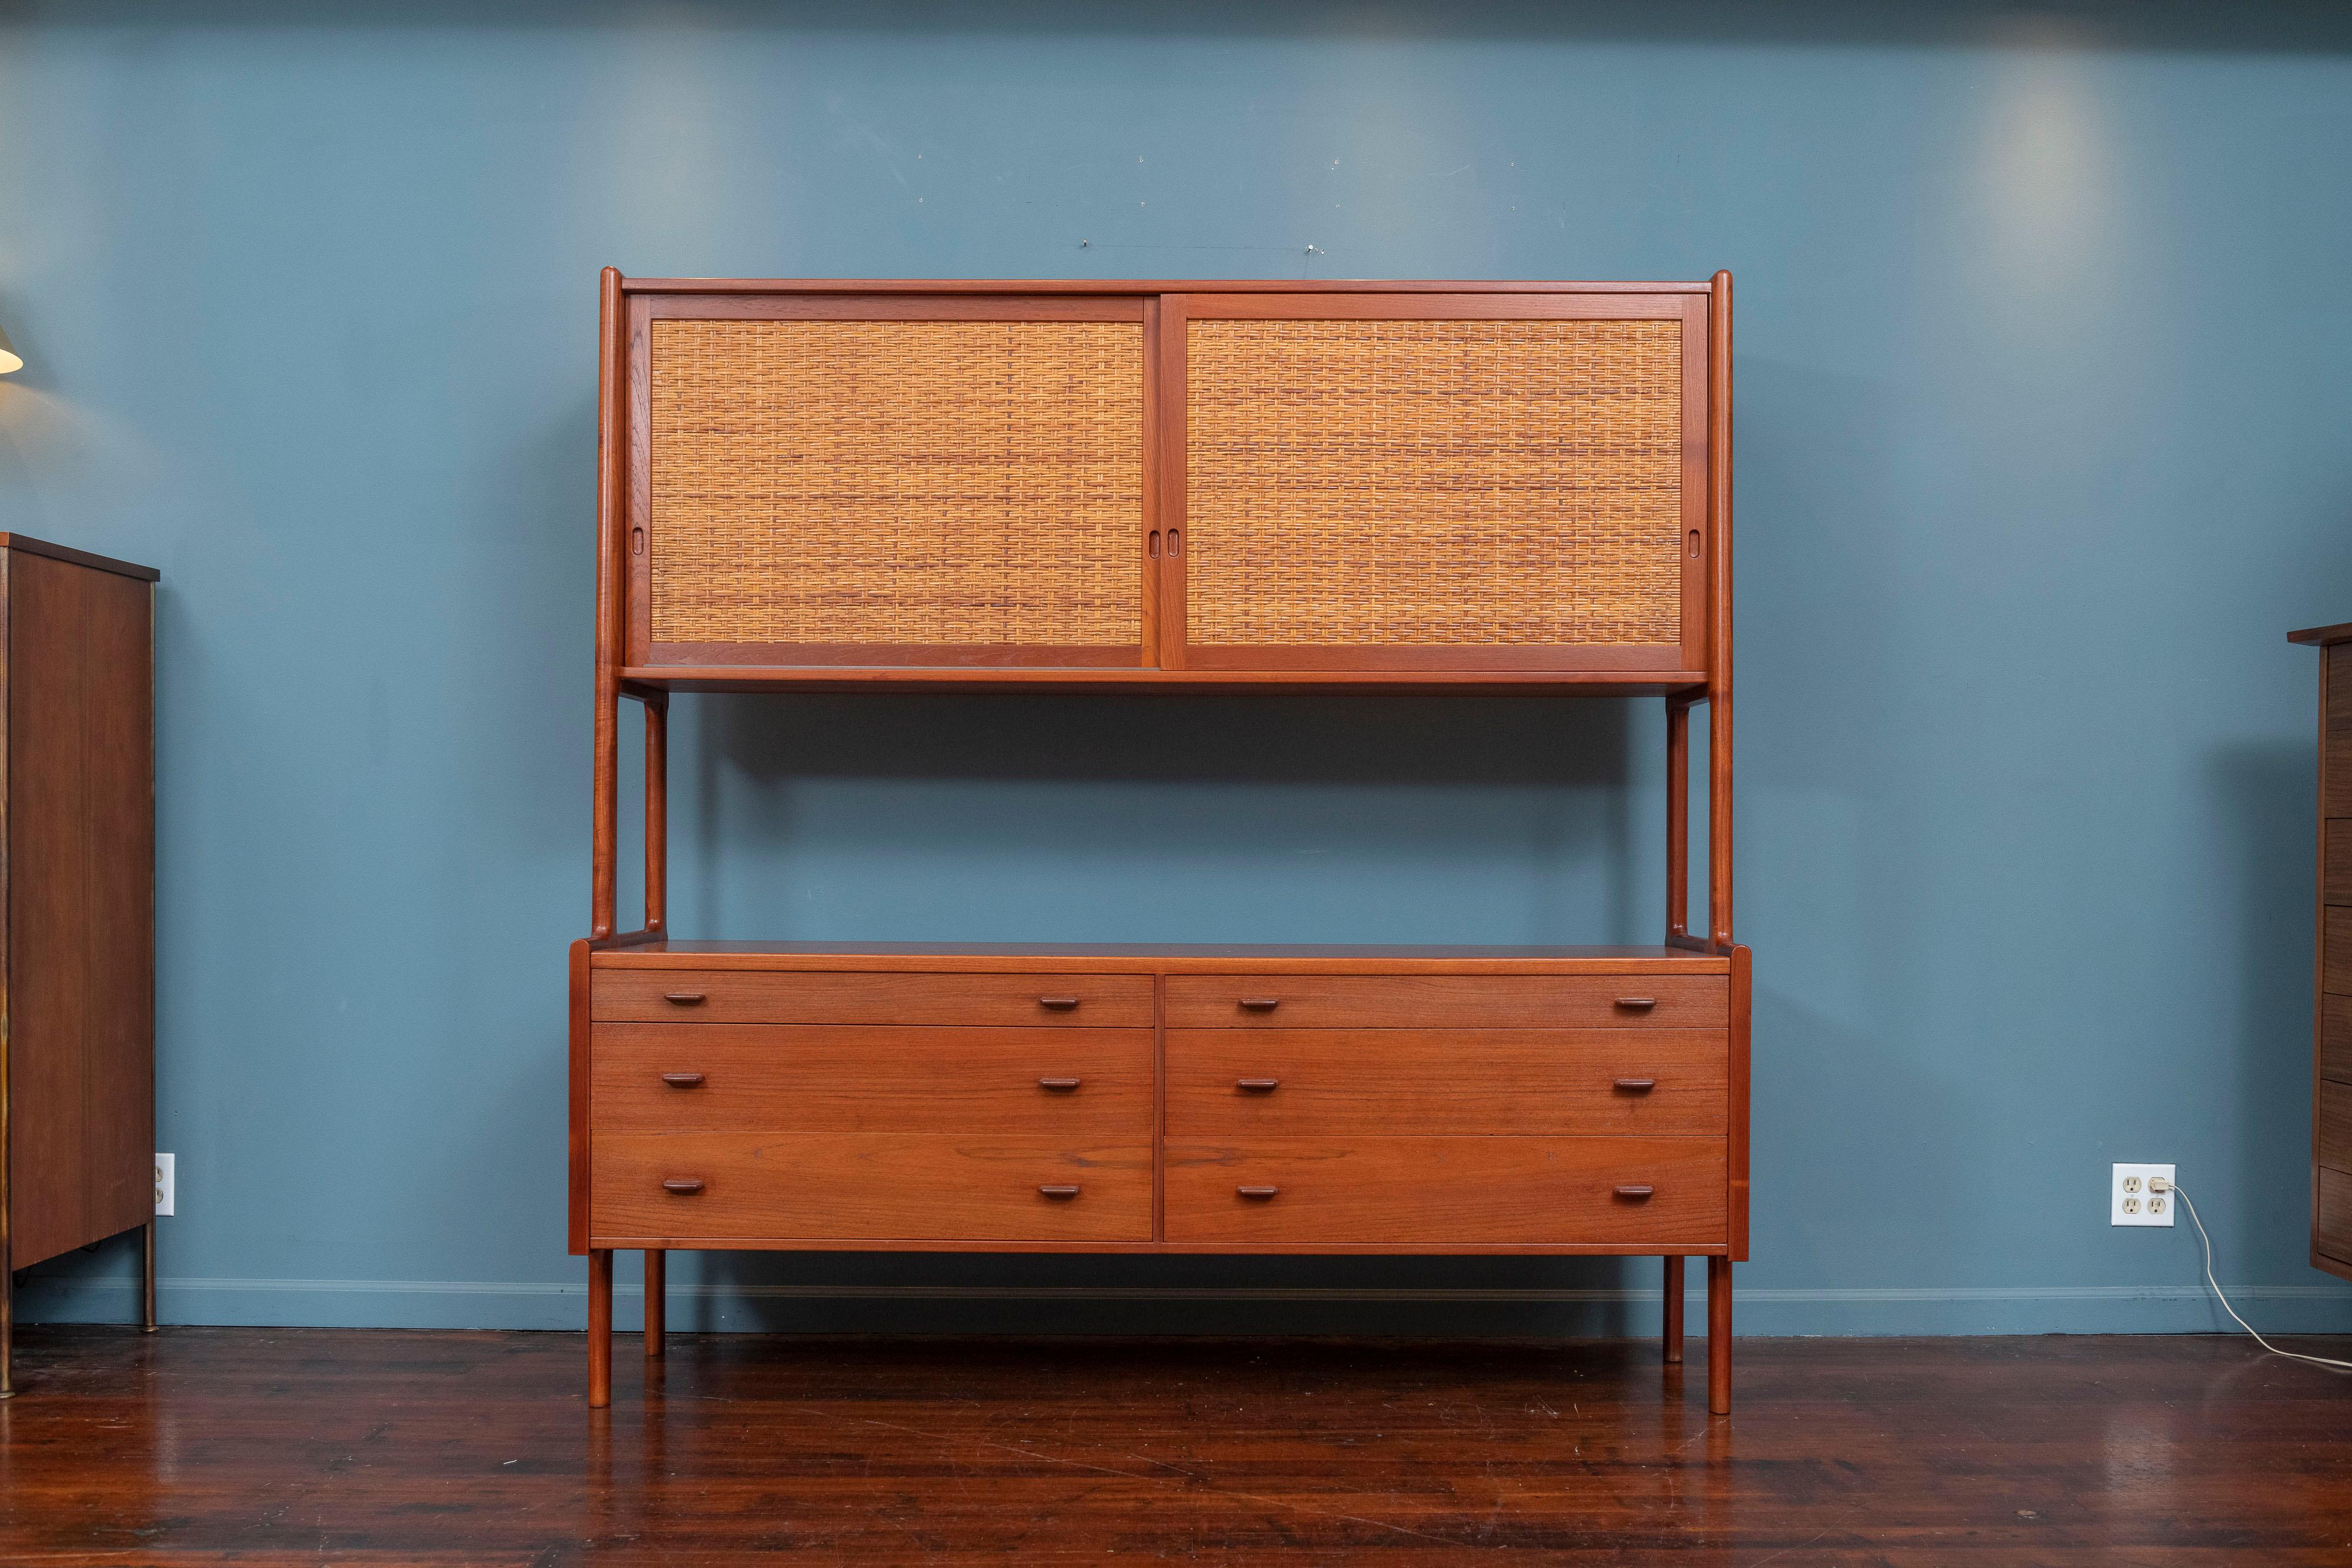 Hans Wegner design credenza or hutch for RY Mobler, Denmark. High quality construction and design with two cane sliding doors revealing adjustable shelves on top and six drawers below for lots of storage.